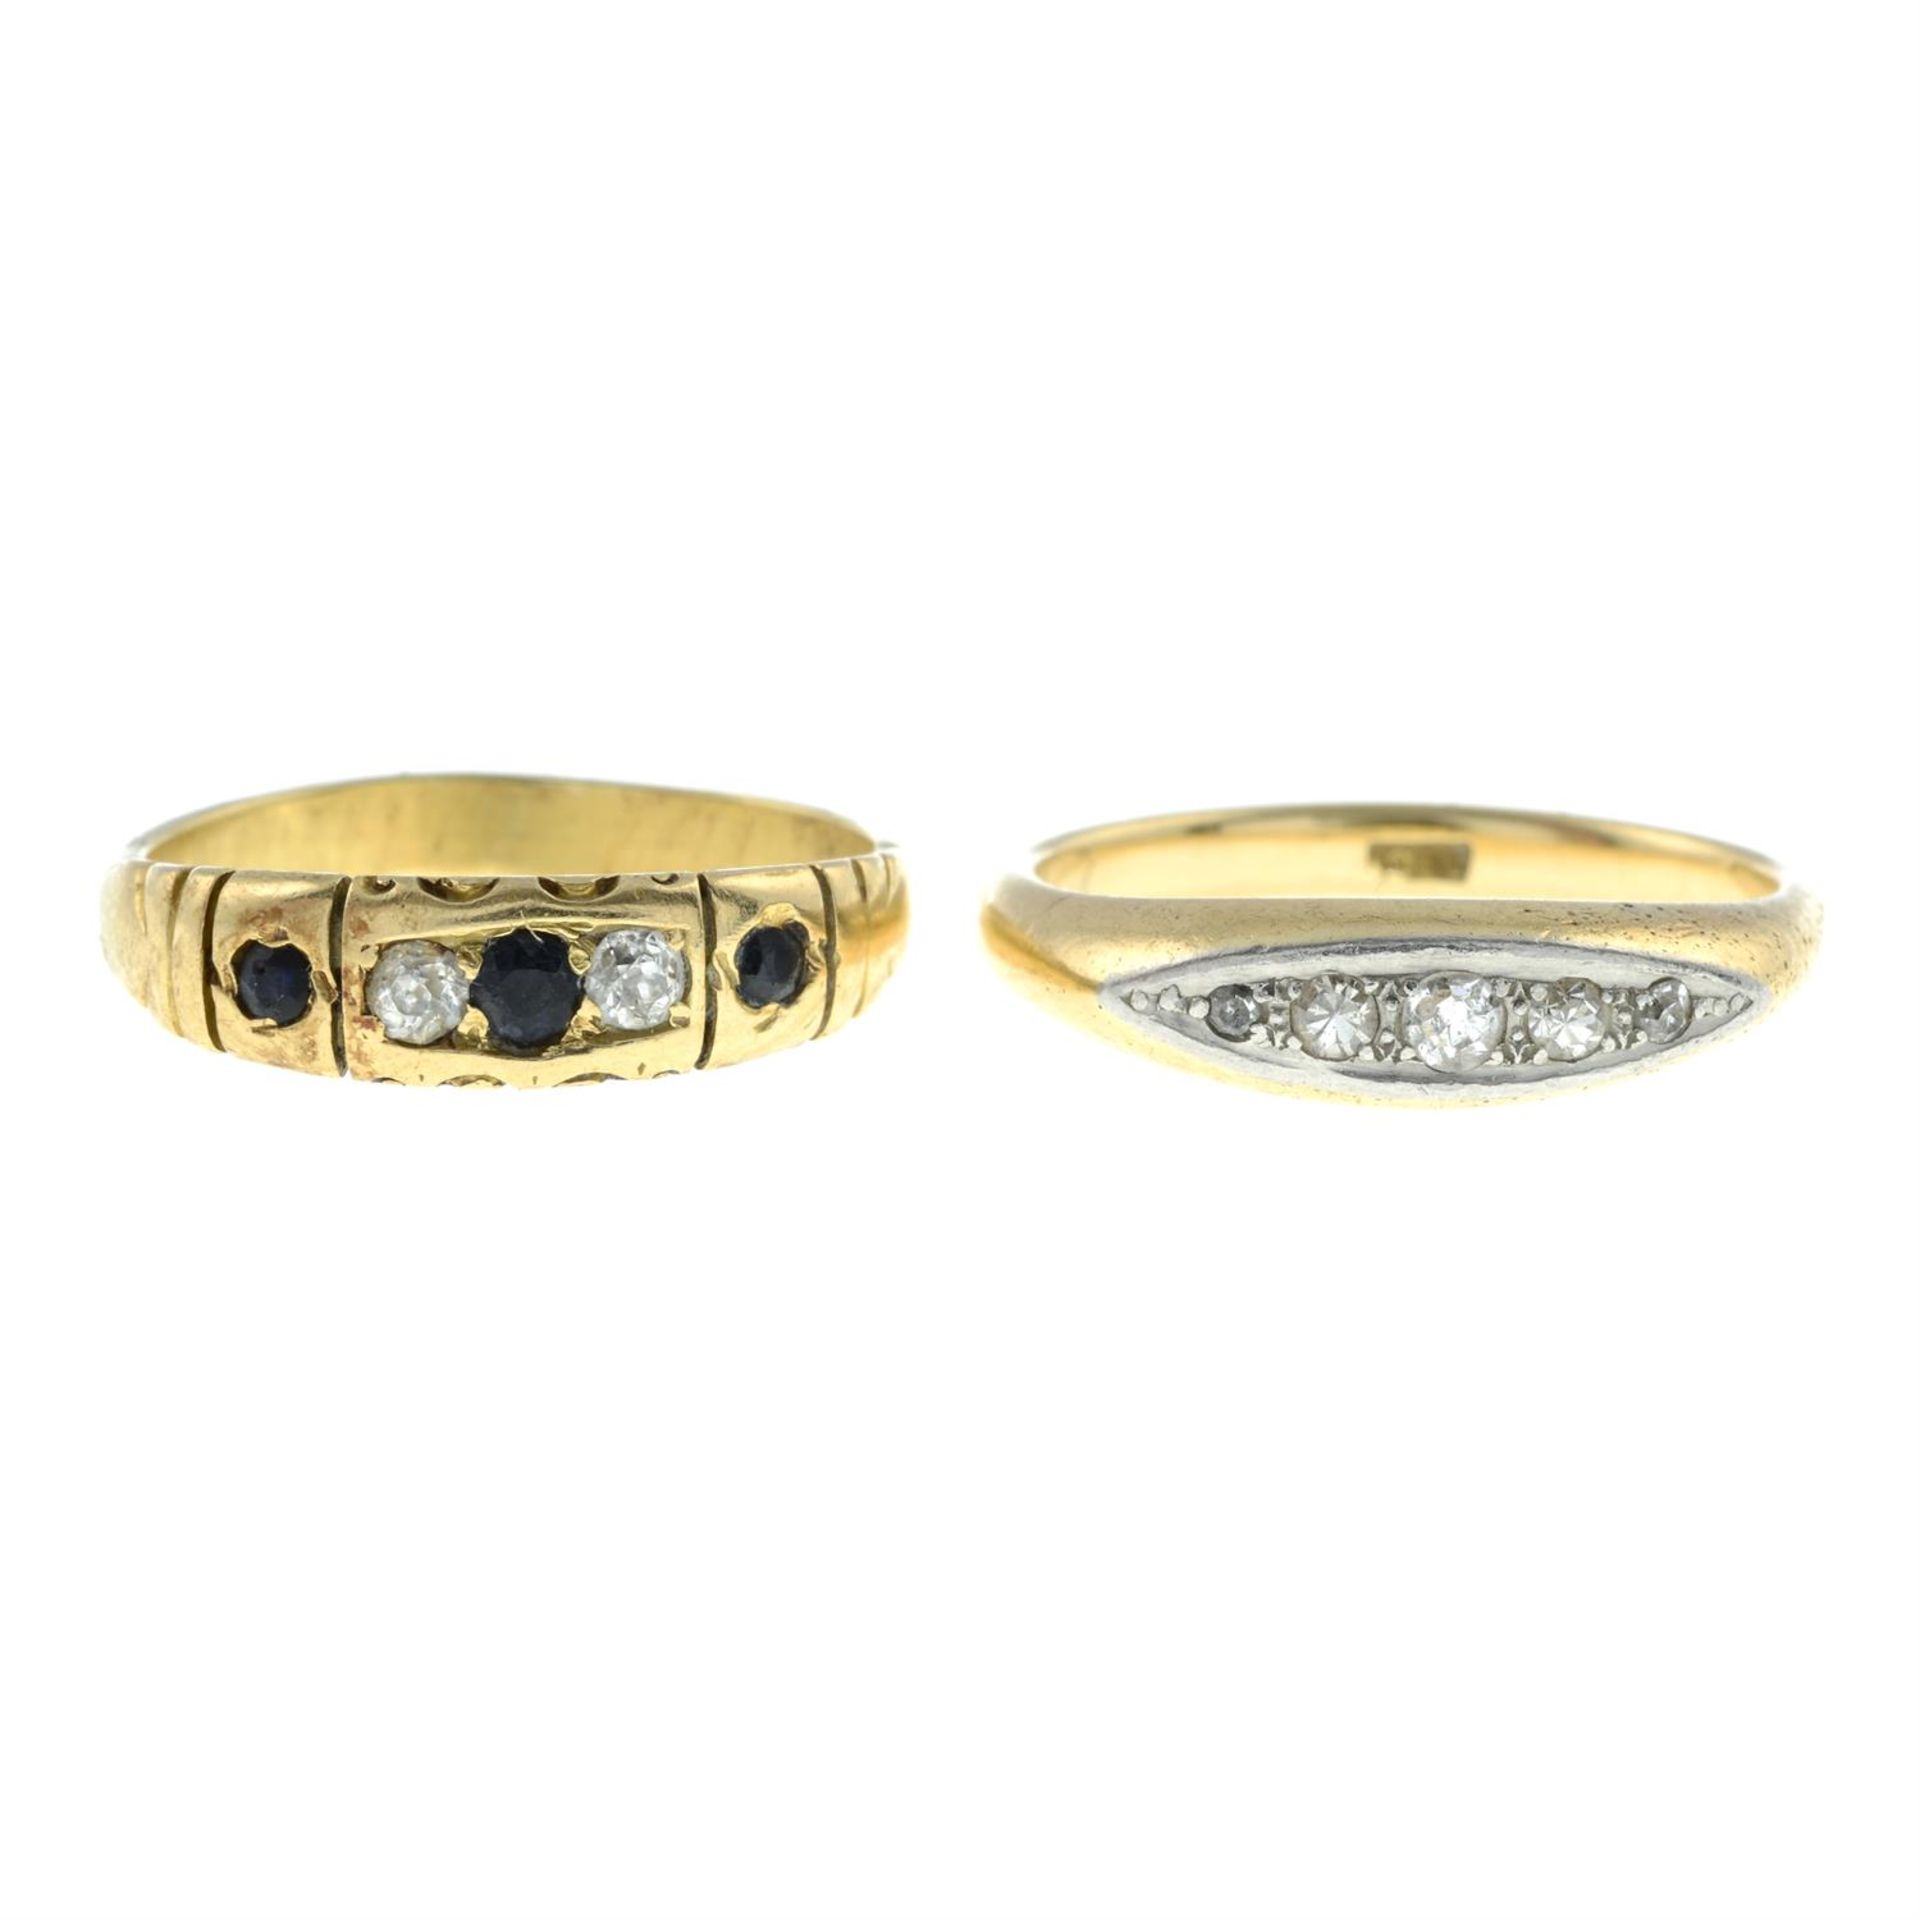 An early 20th century 18ct gold old-cut diamond five-stone ring, together with a sapphire and